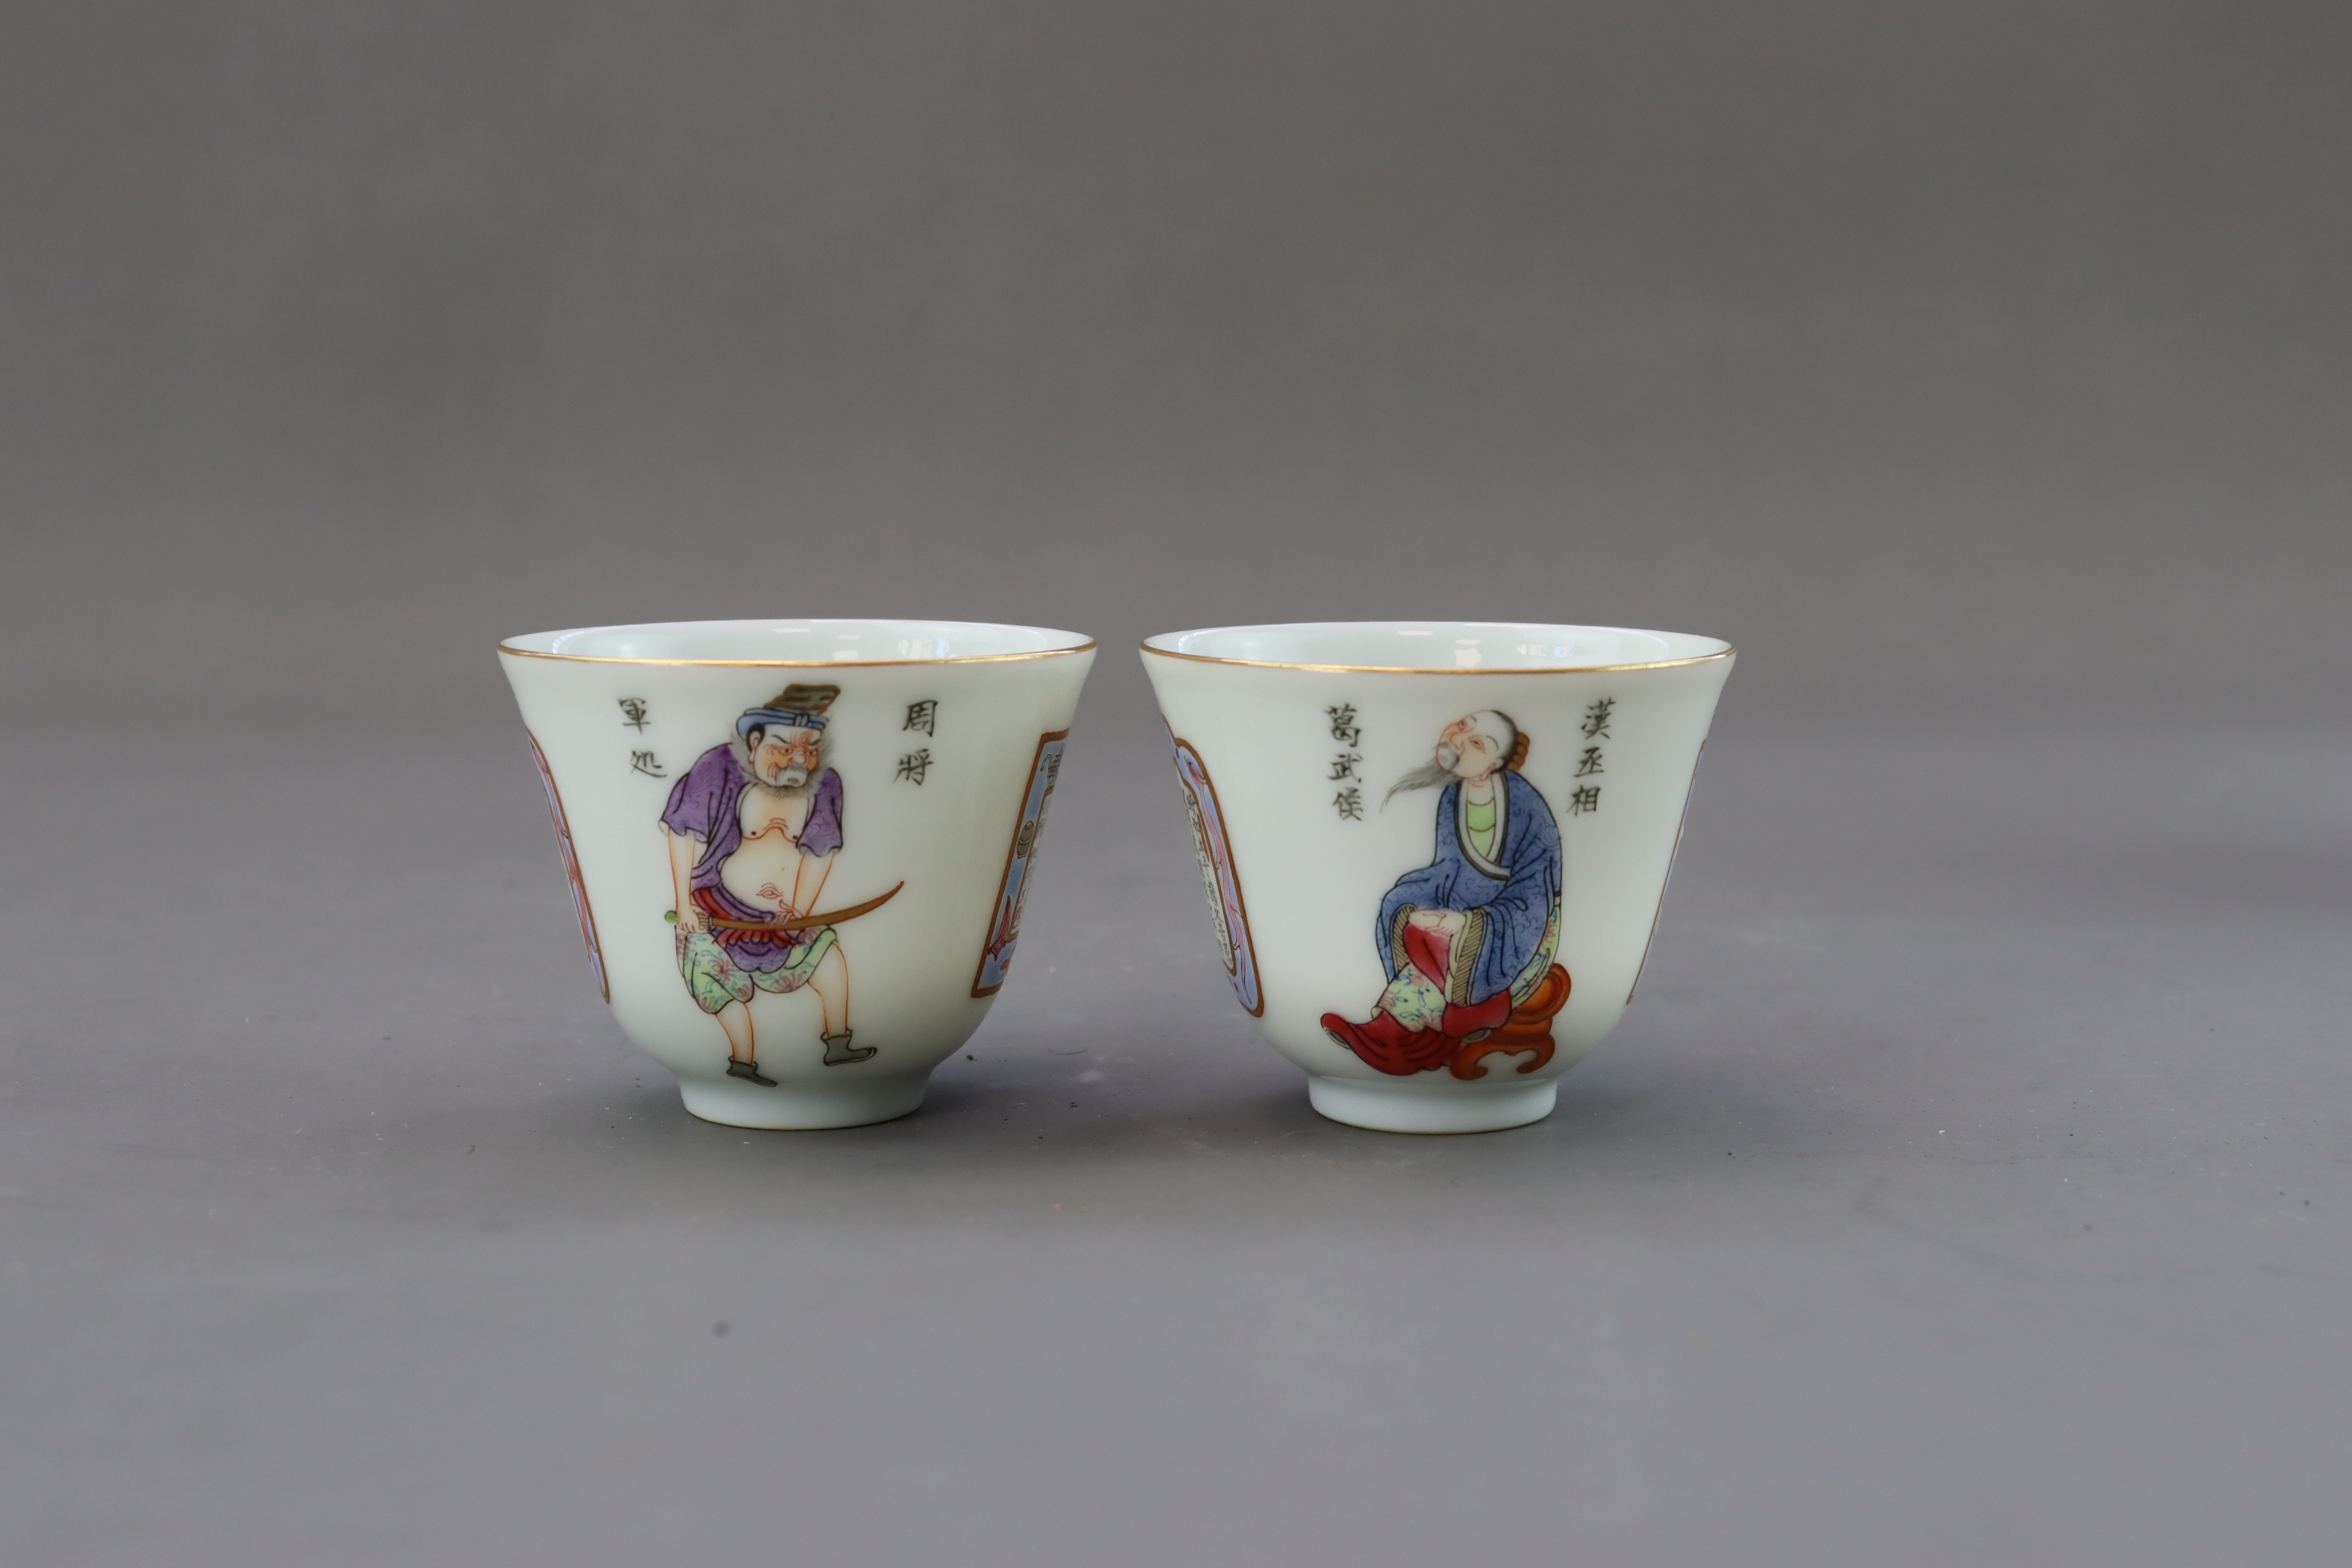 A Pair of Famille-rose 'Wushuangpu' Cups